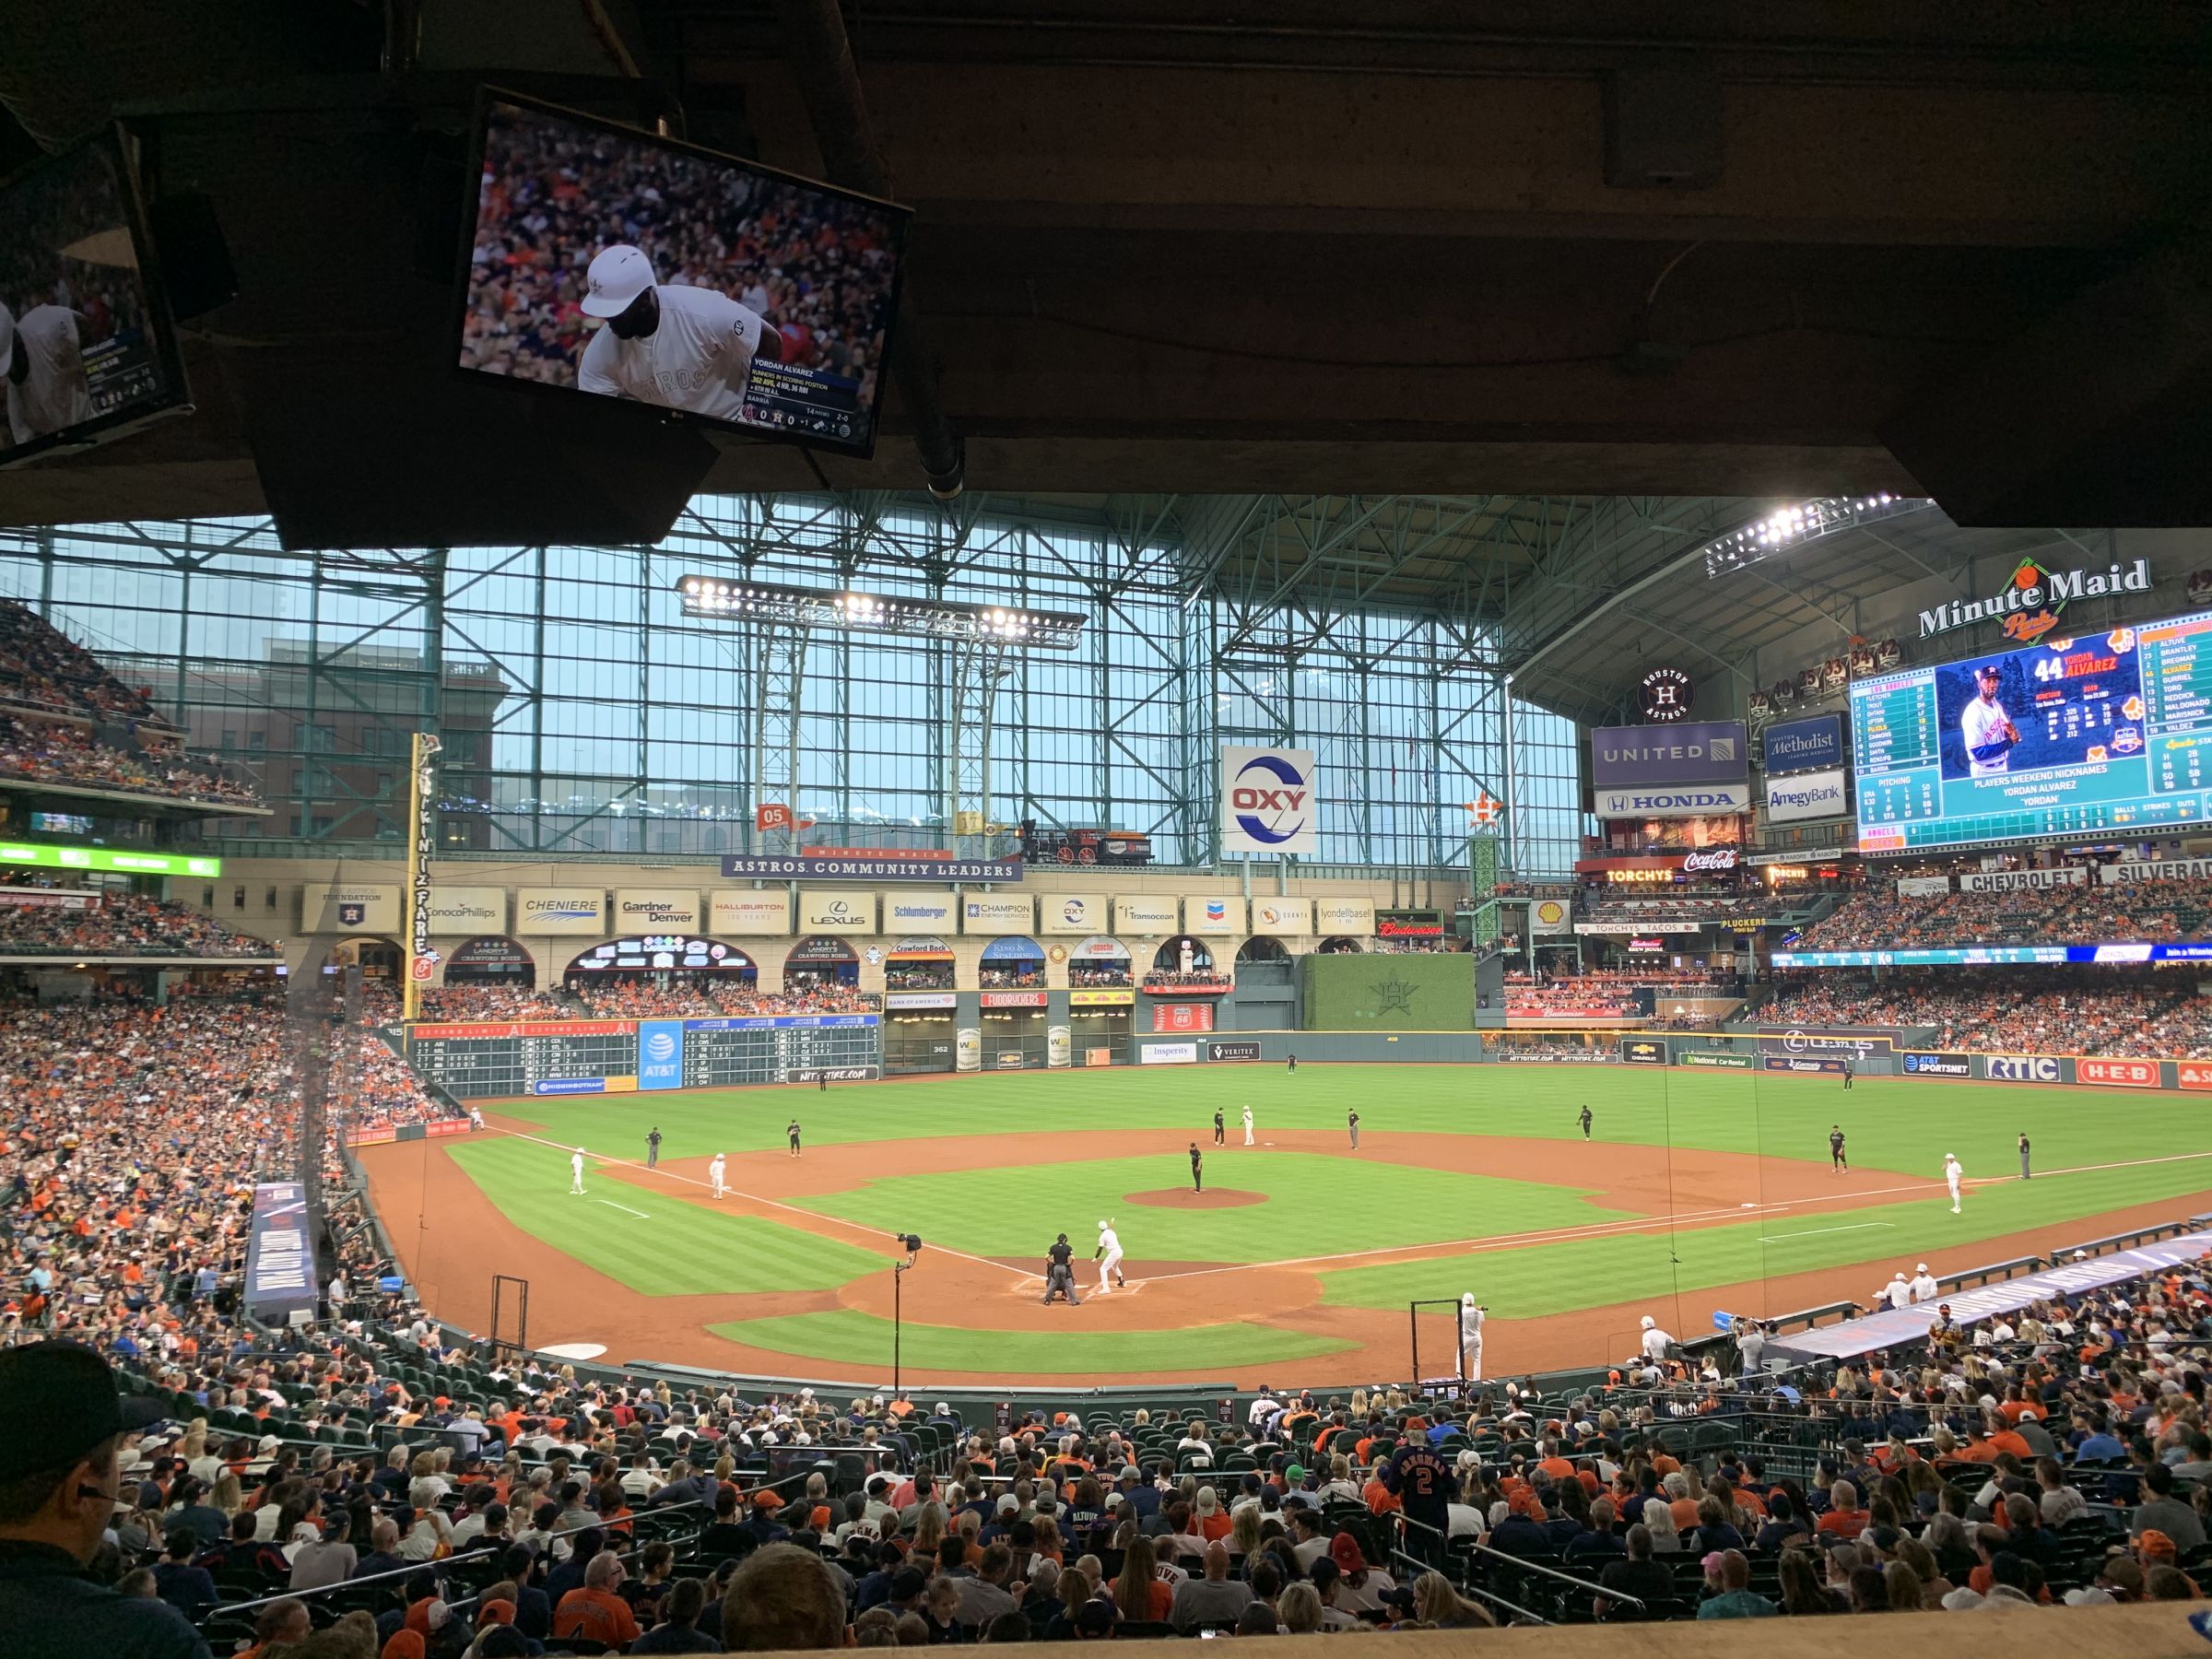 insperity club, row 1 seat view  for baseball - minute maid park